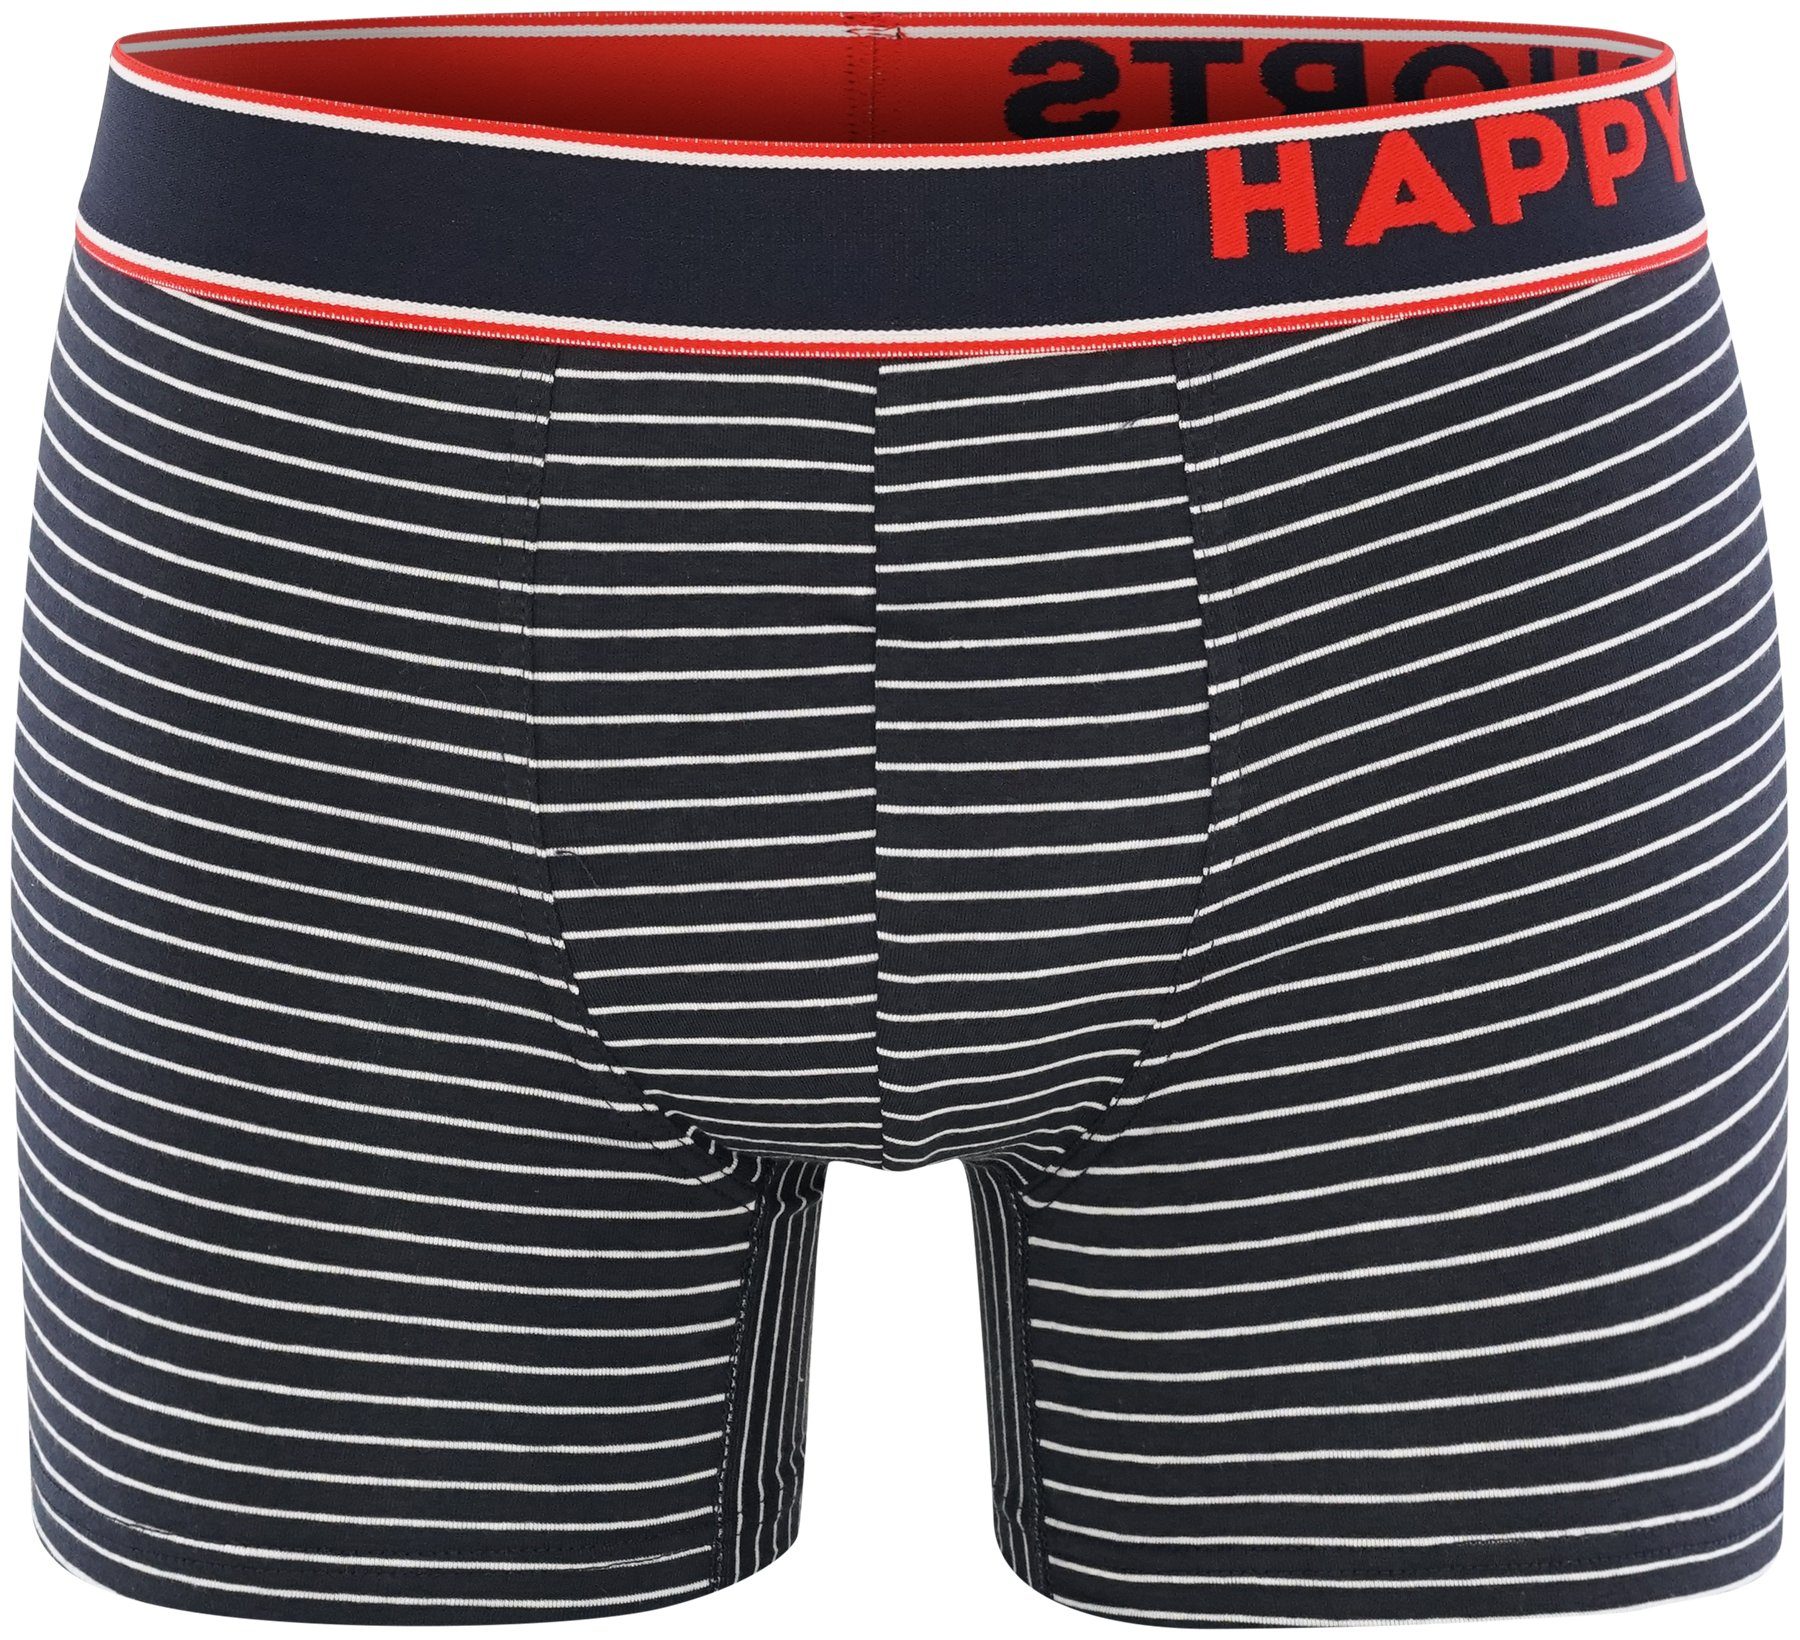 and 2-Pack SHORTS Retro HAPPY Pants Strawberries Trunks (2-St) Stripe